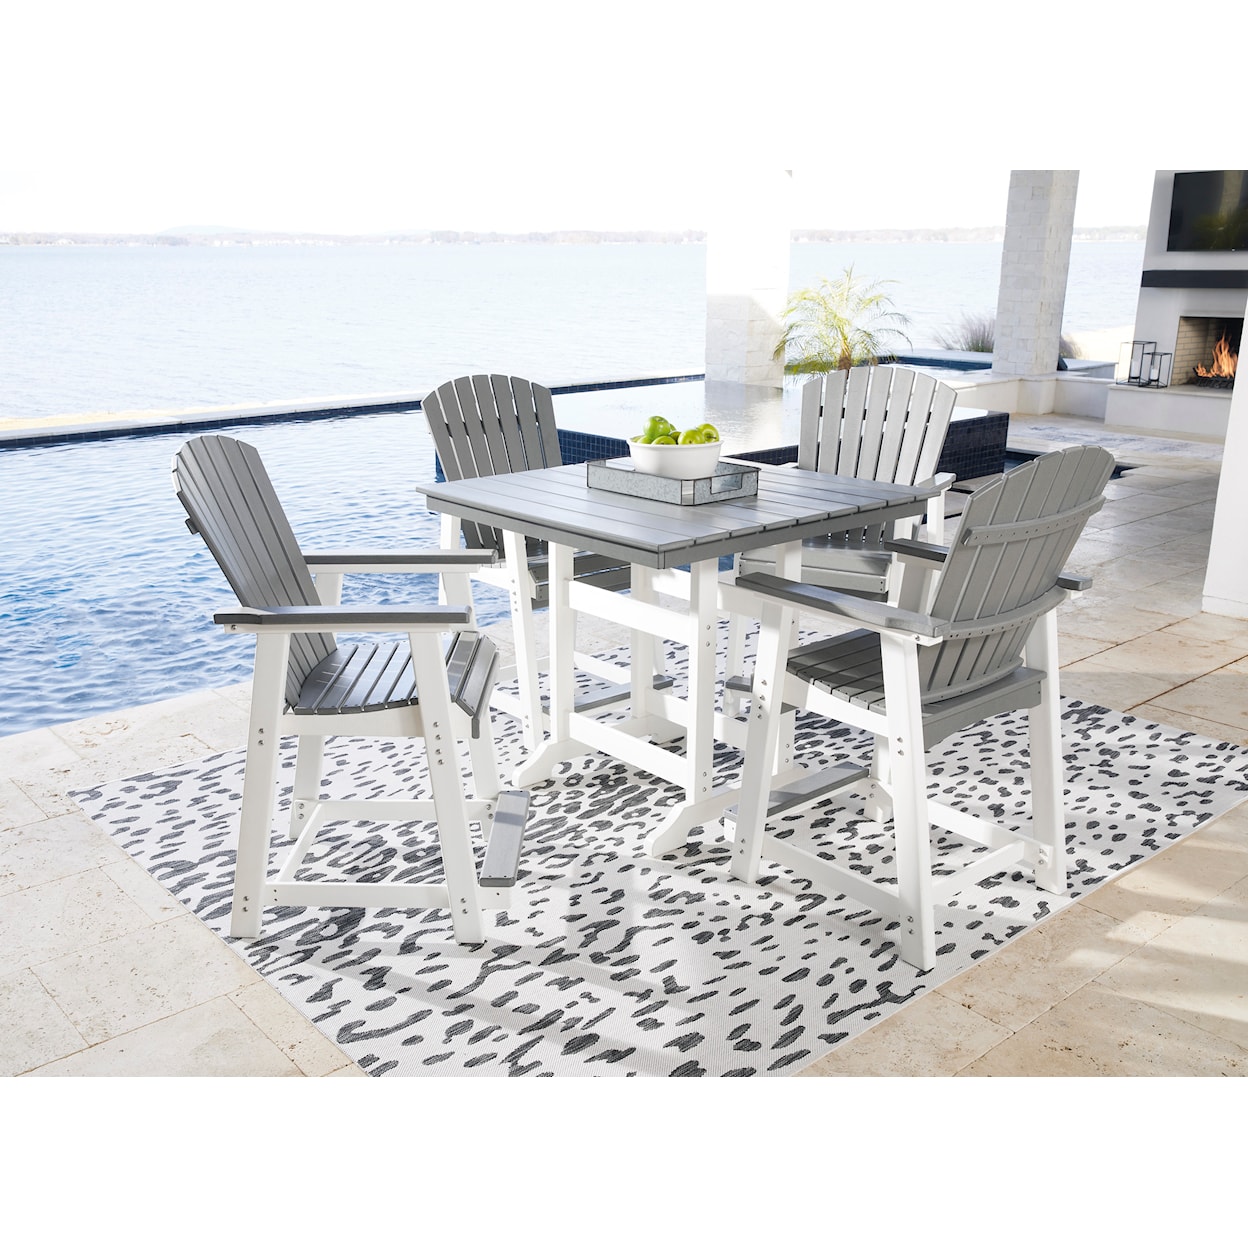 Ashley Furniture Signature Design Transville Outdoor Counter Height Dining Table